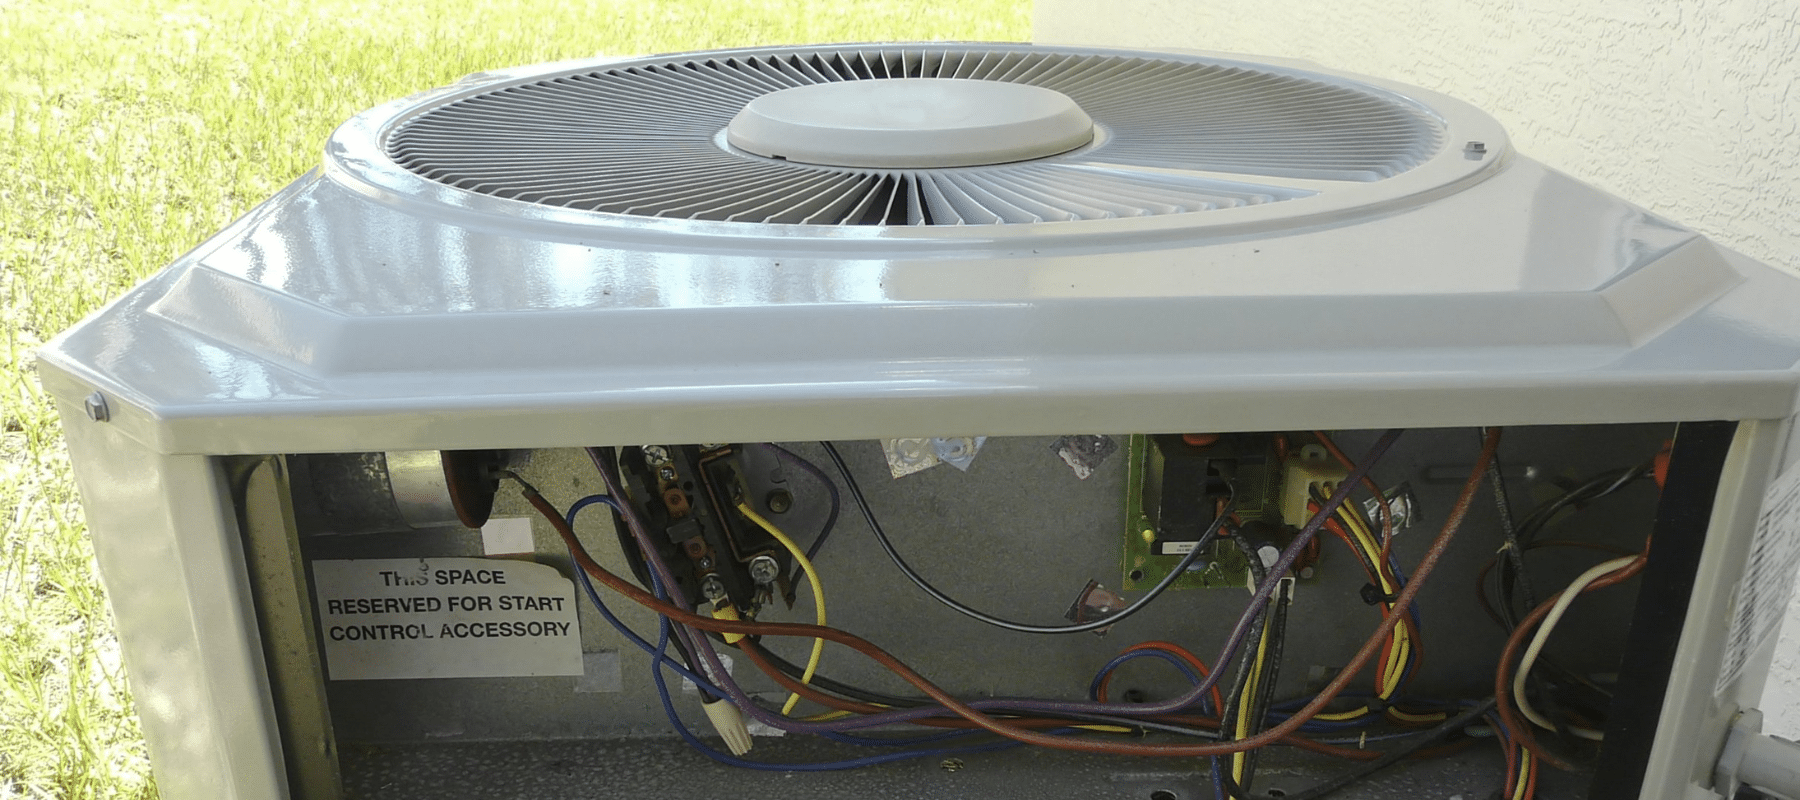 closeup outdoor hvac unit with side panel removed showing the wiring and other components inside